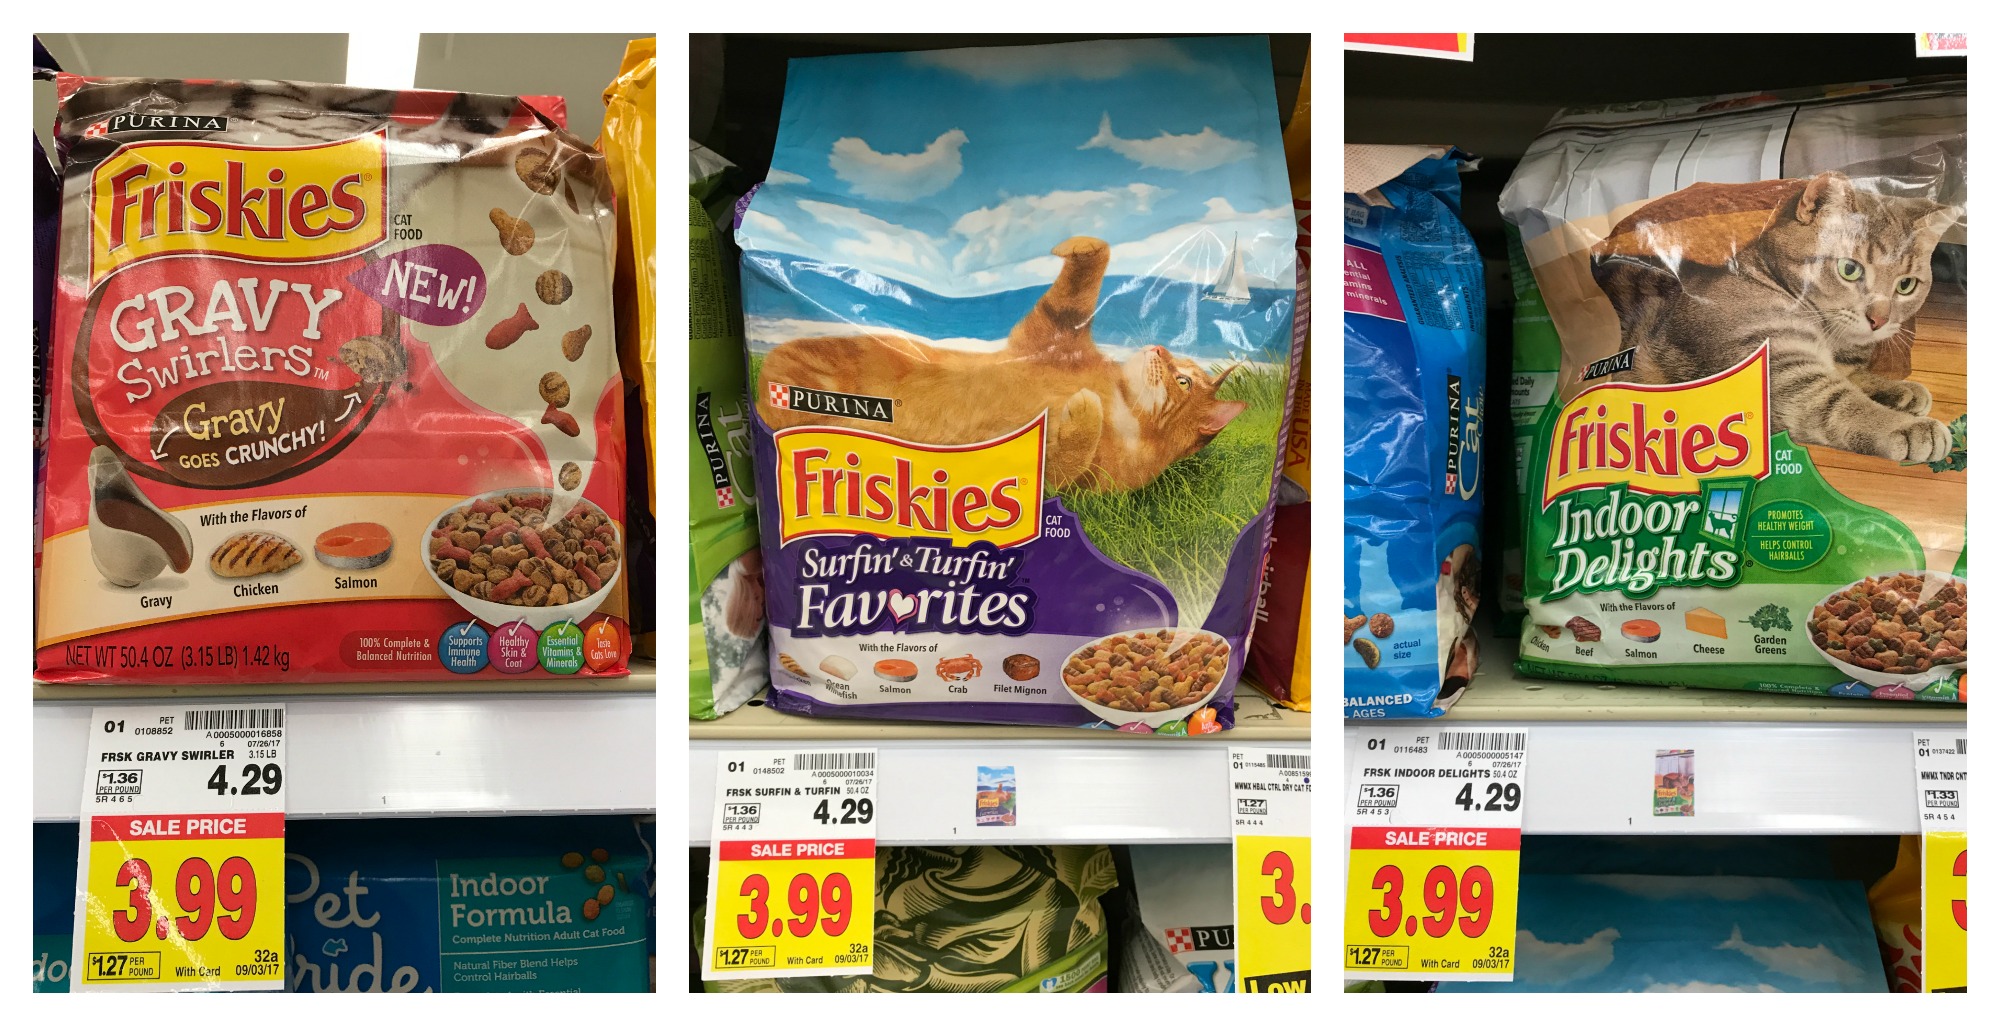 new-friskies-coupons-gravy-swirlers-cat-food-only-2-69-at-kroger